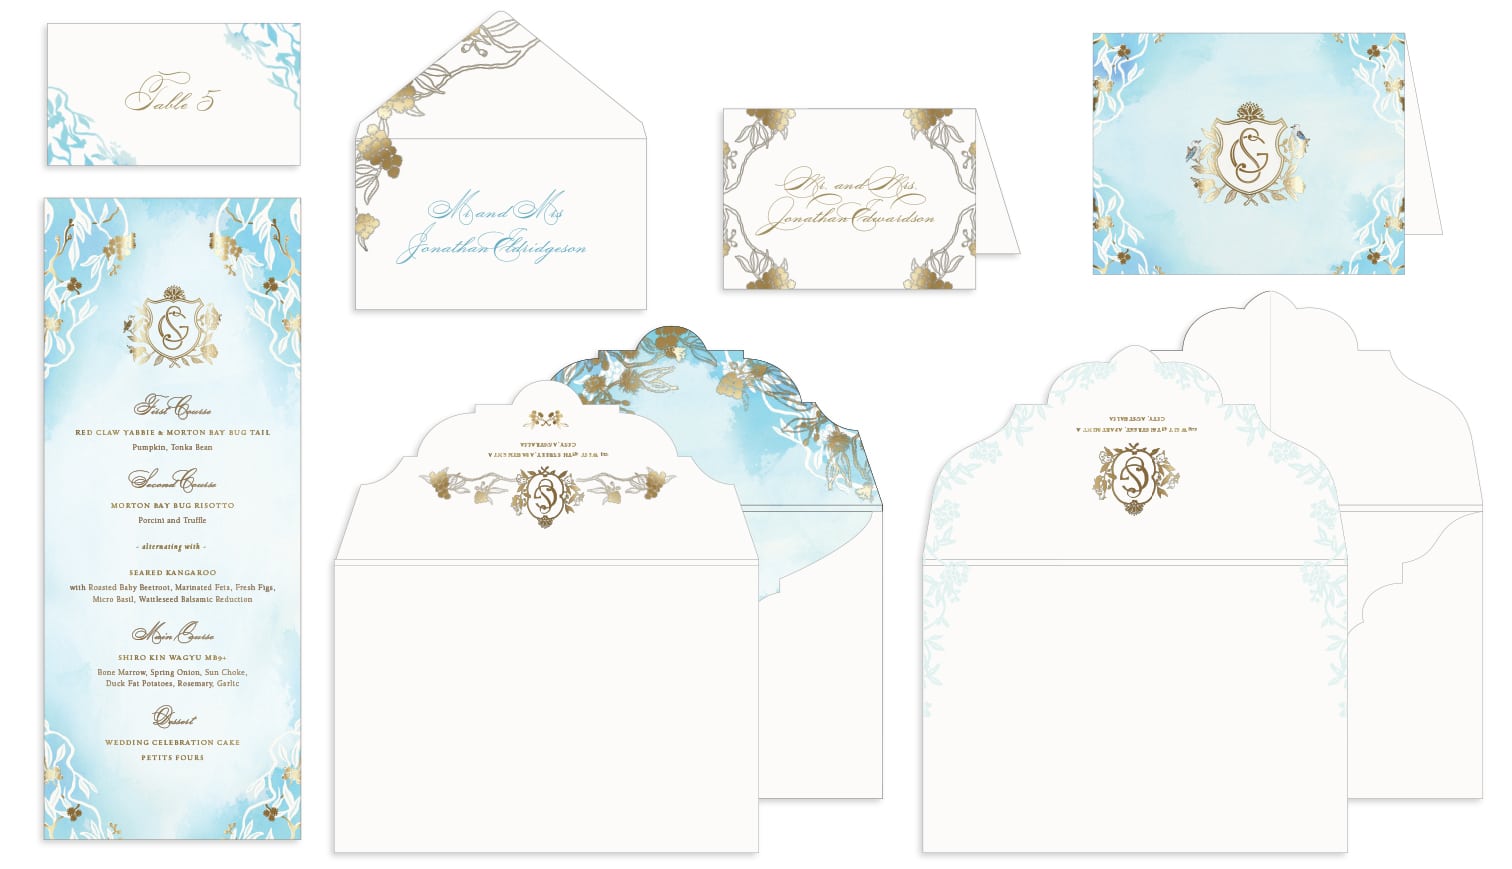 Watercolor and foil menu, place card, thank you card and envelopes